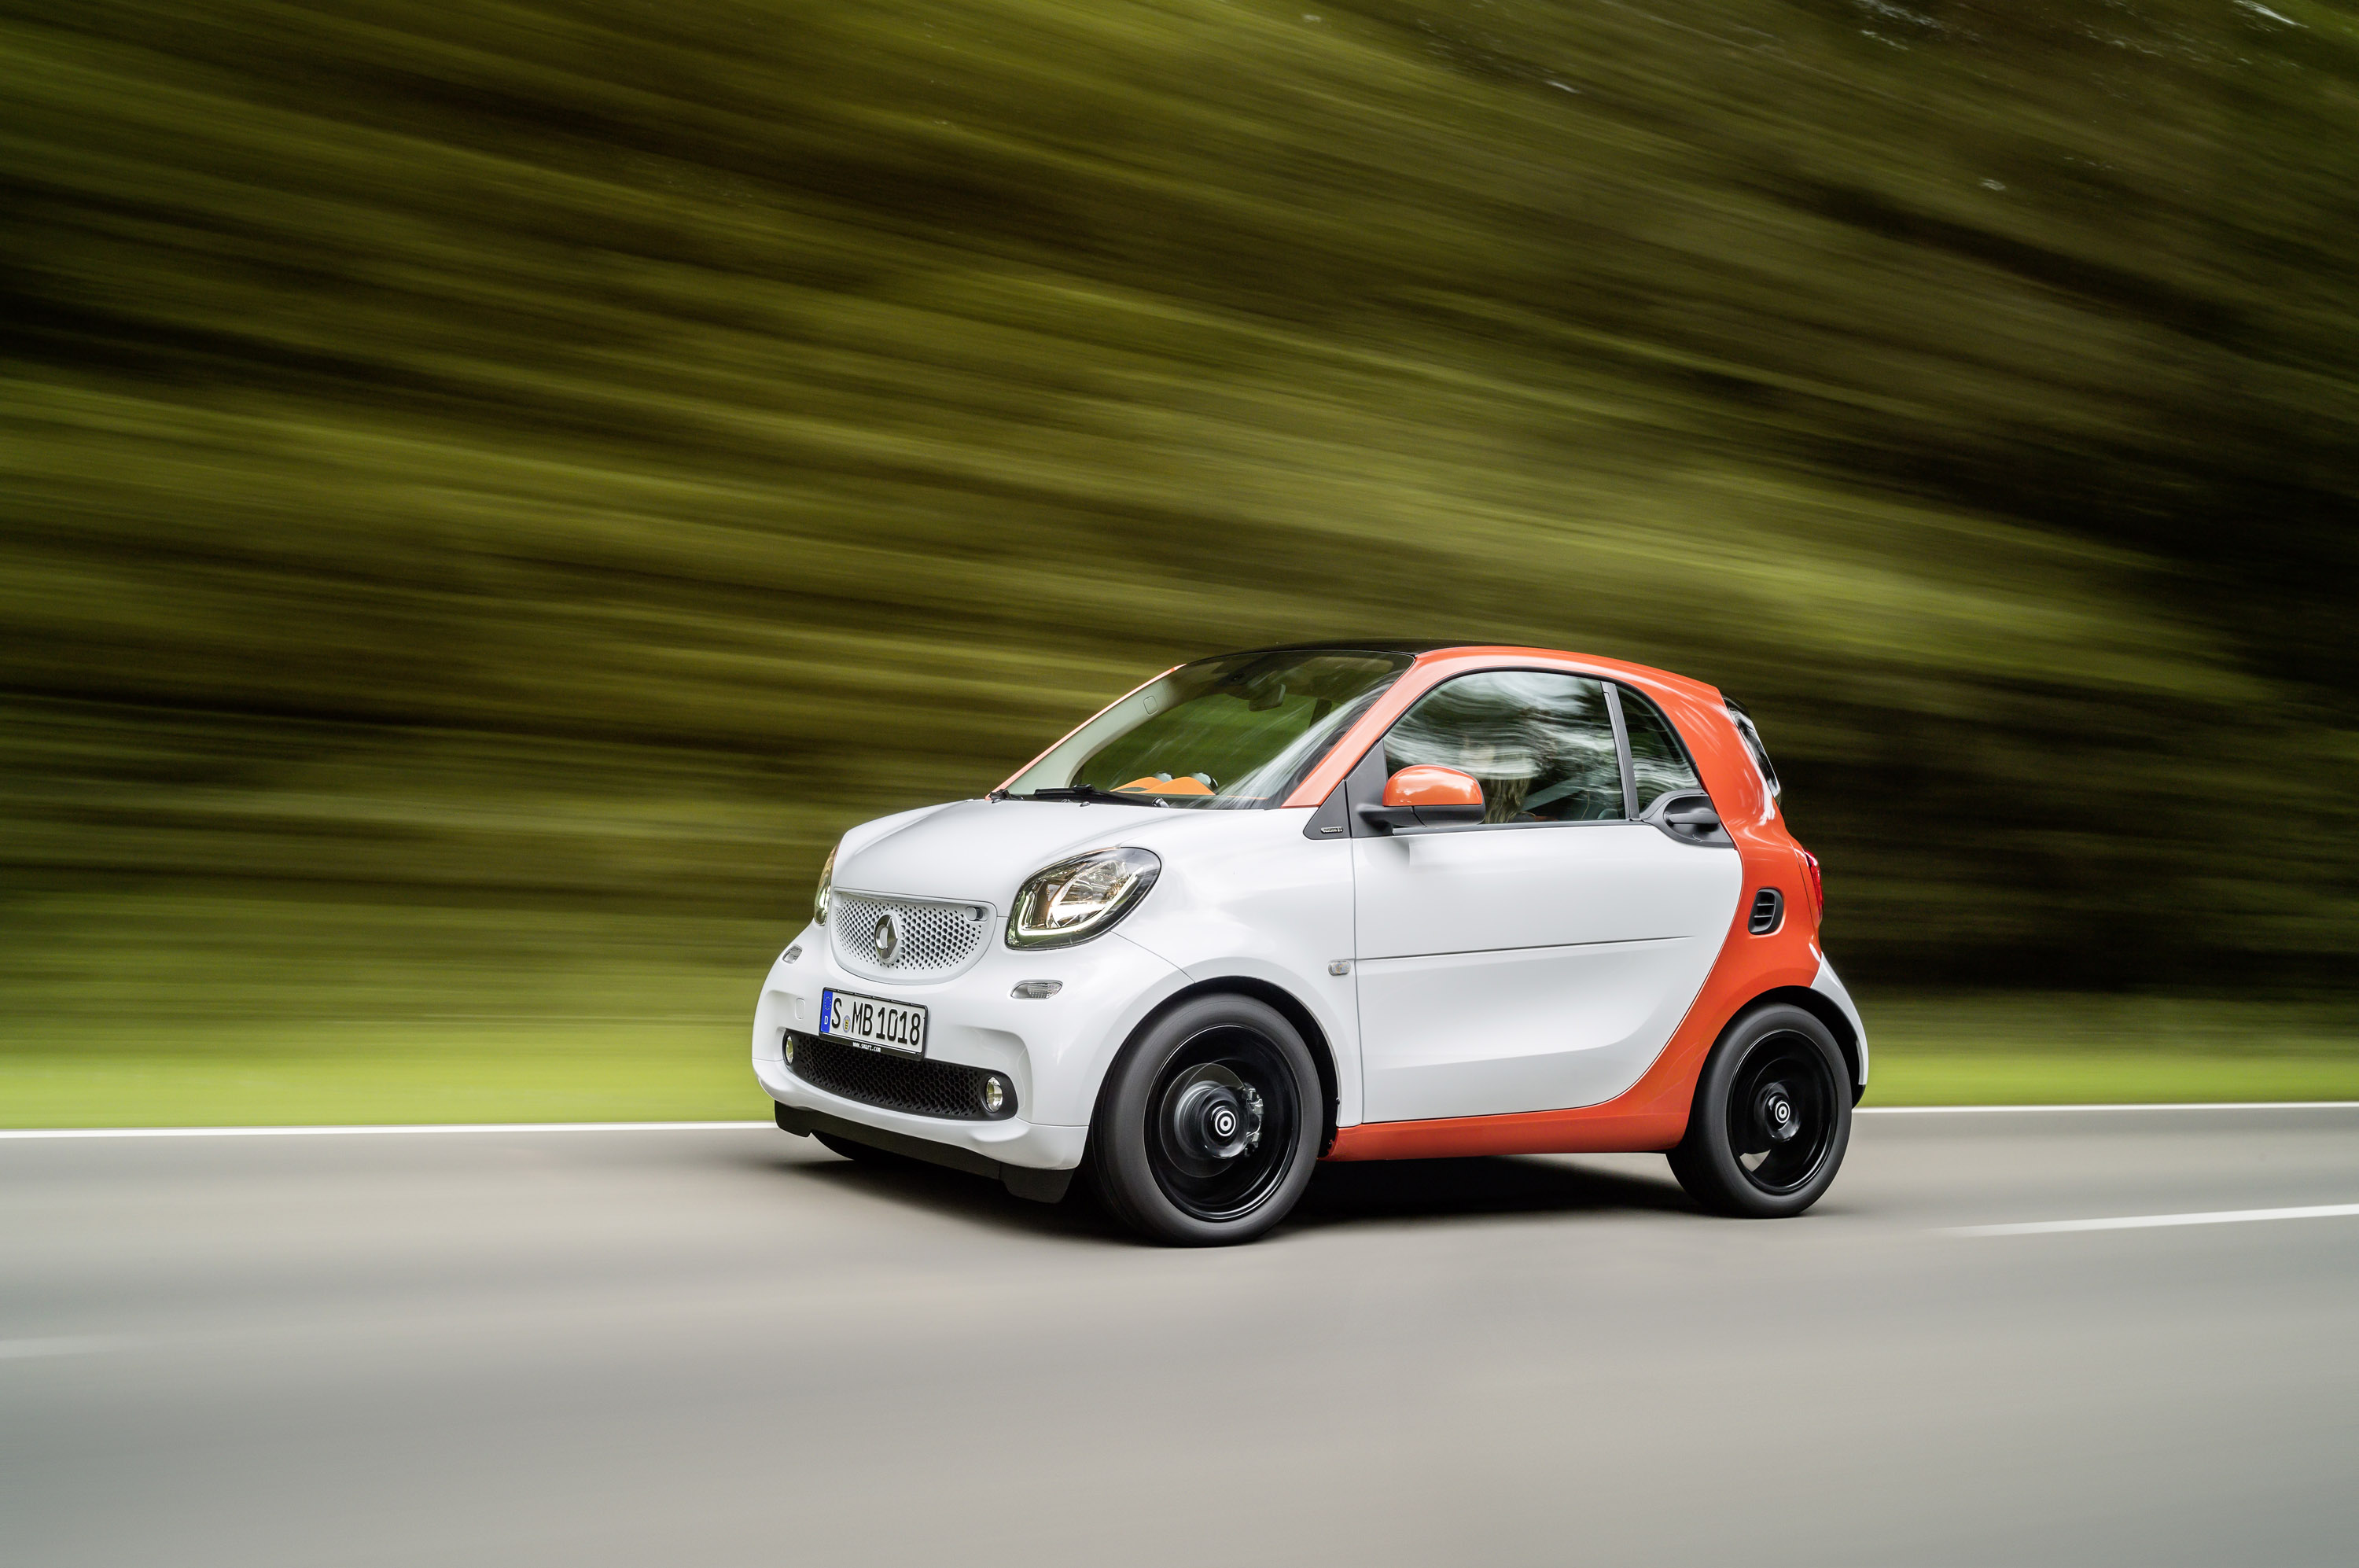 Smart Fortwo and Forfour